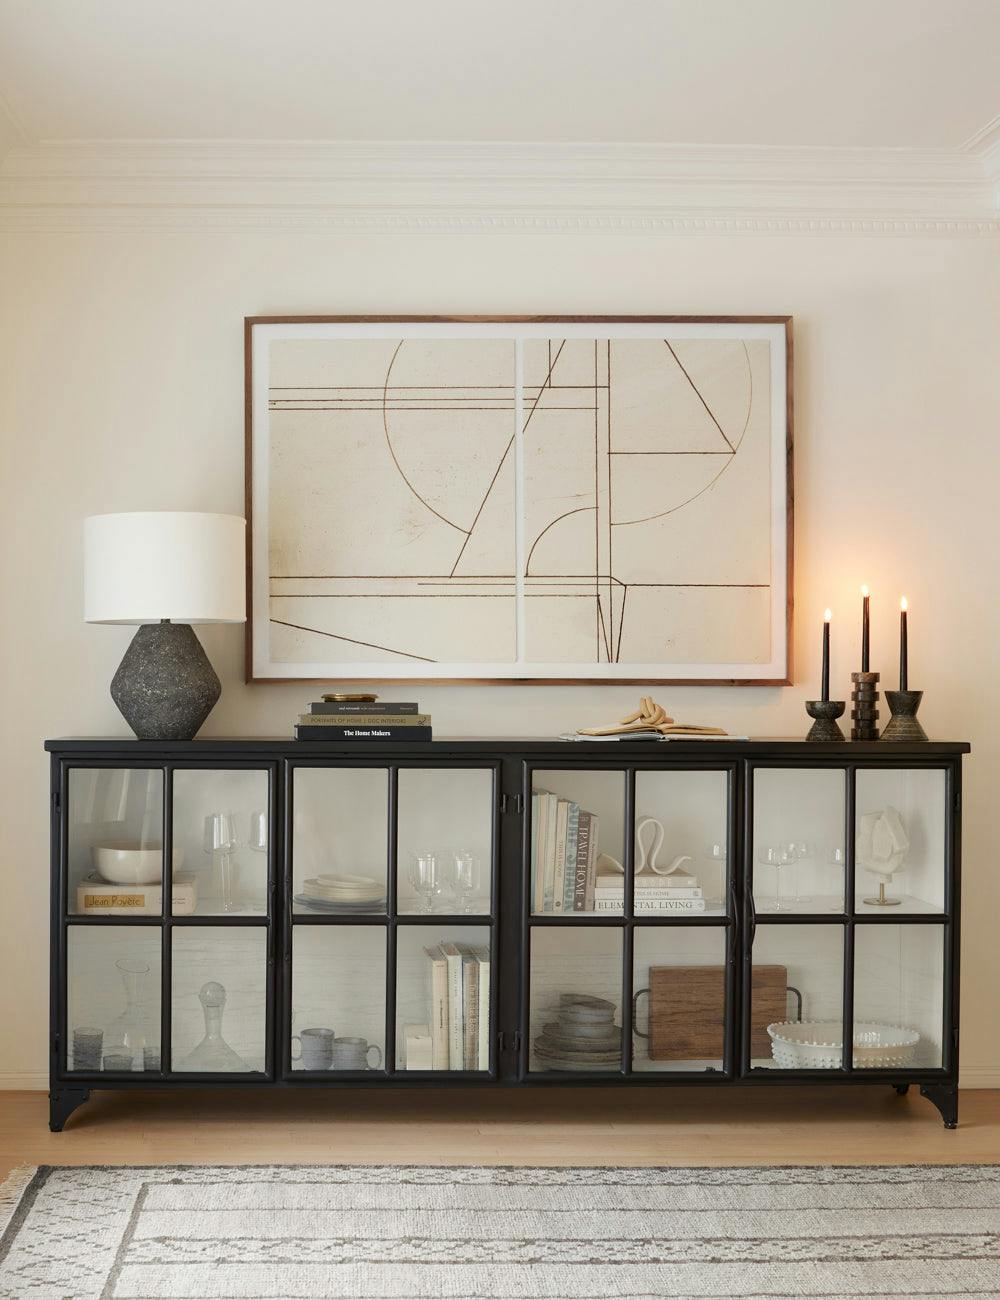 Marjorie 94.5" Black Iron and White Glass Industrial Sideboard